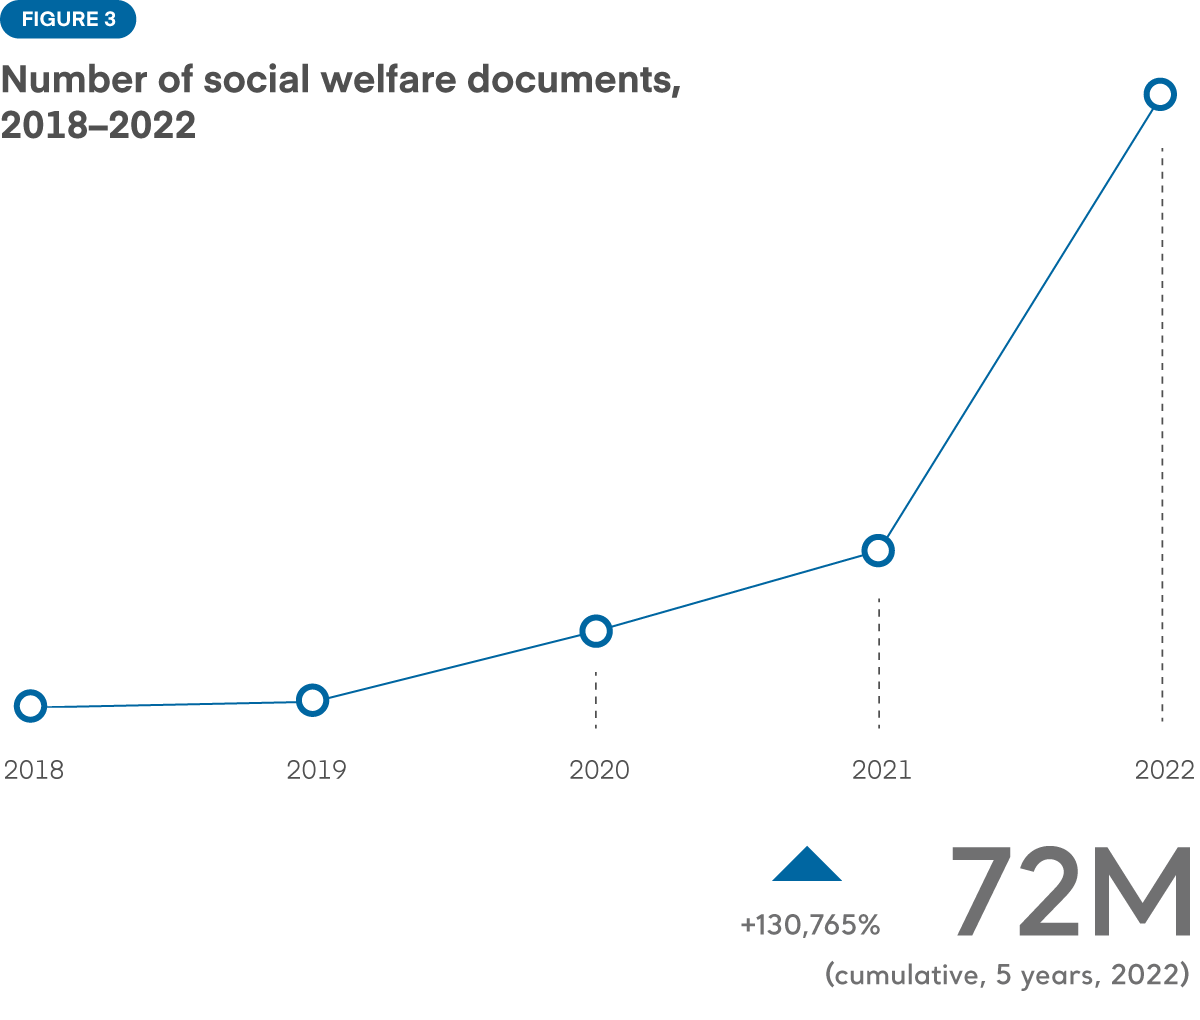 Figure 3. The number of social welfare documents in Kanta has grown rapidly, especially in 2021 and 2022. In 2018 and 2019, there was very little growth. In 2022, there were 72 million documents in Kanta. 